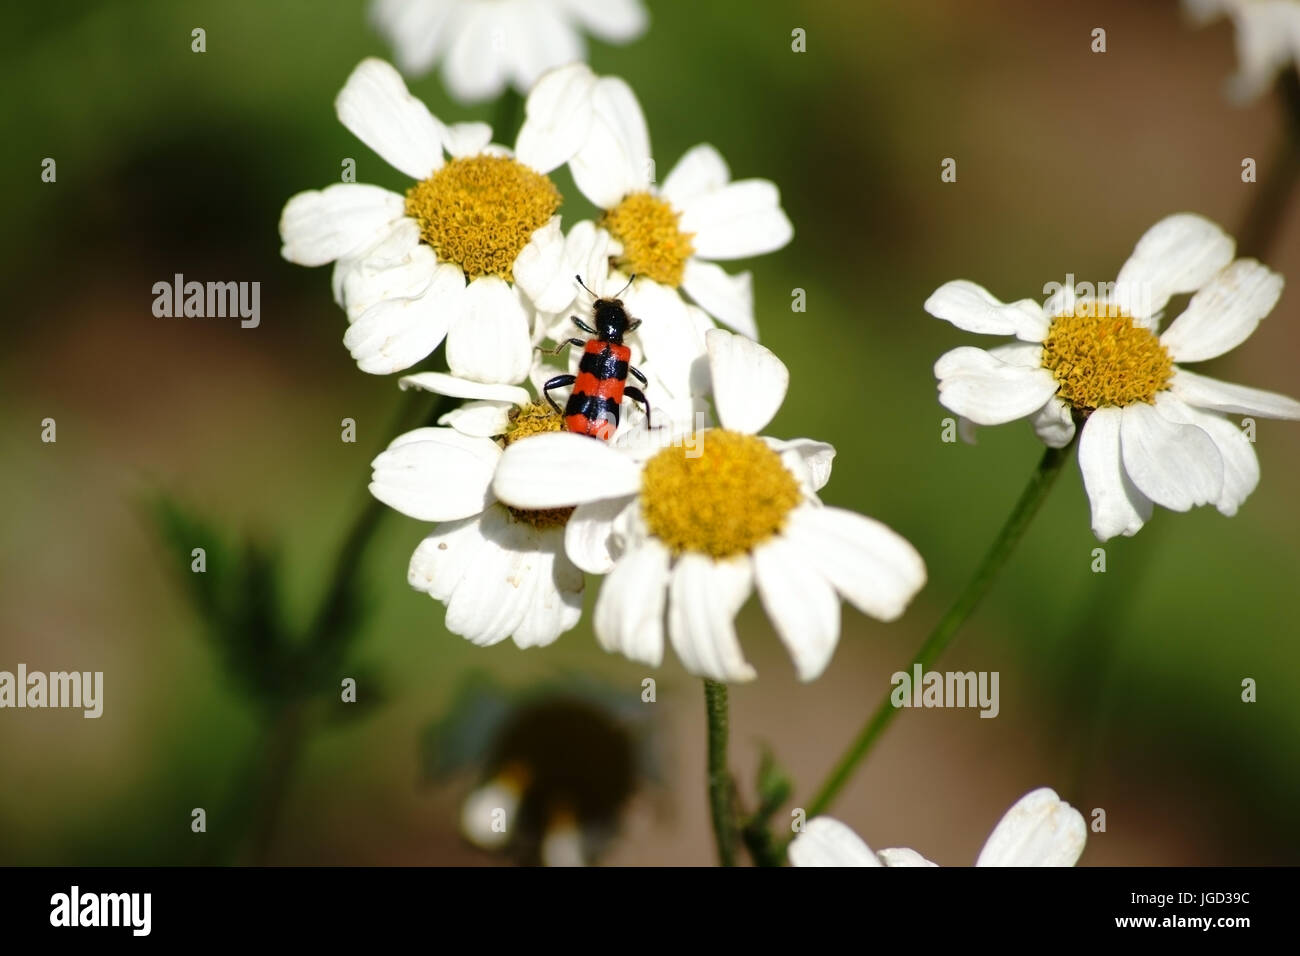 A colorful and black red striped beetle beetle on a daisy, xylanthemum. Stock Photo